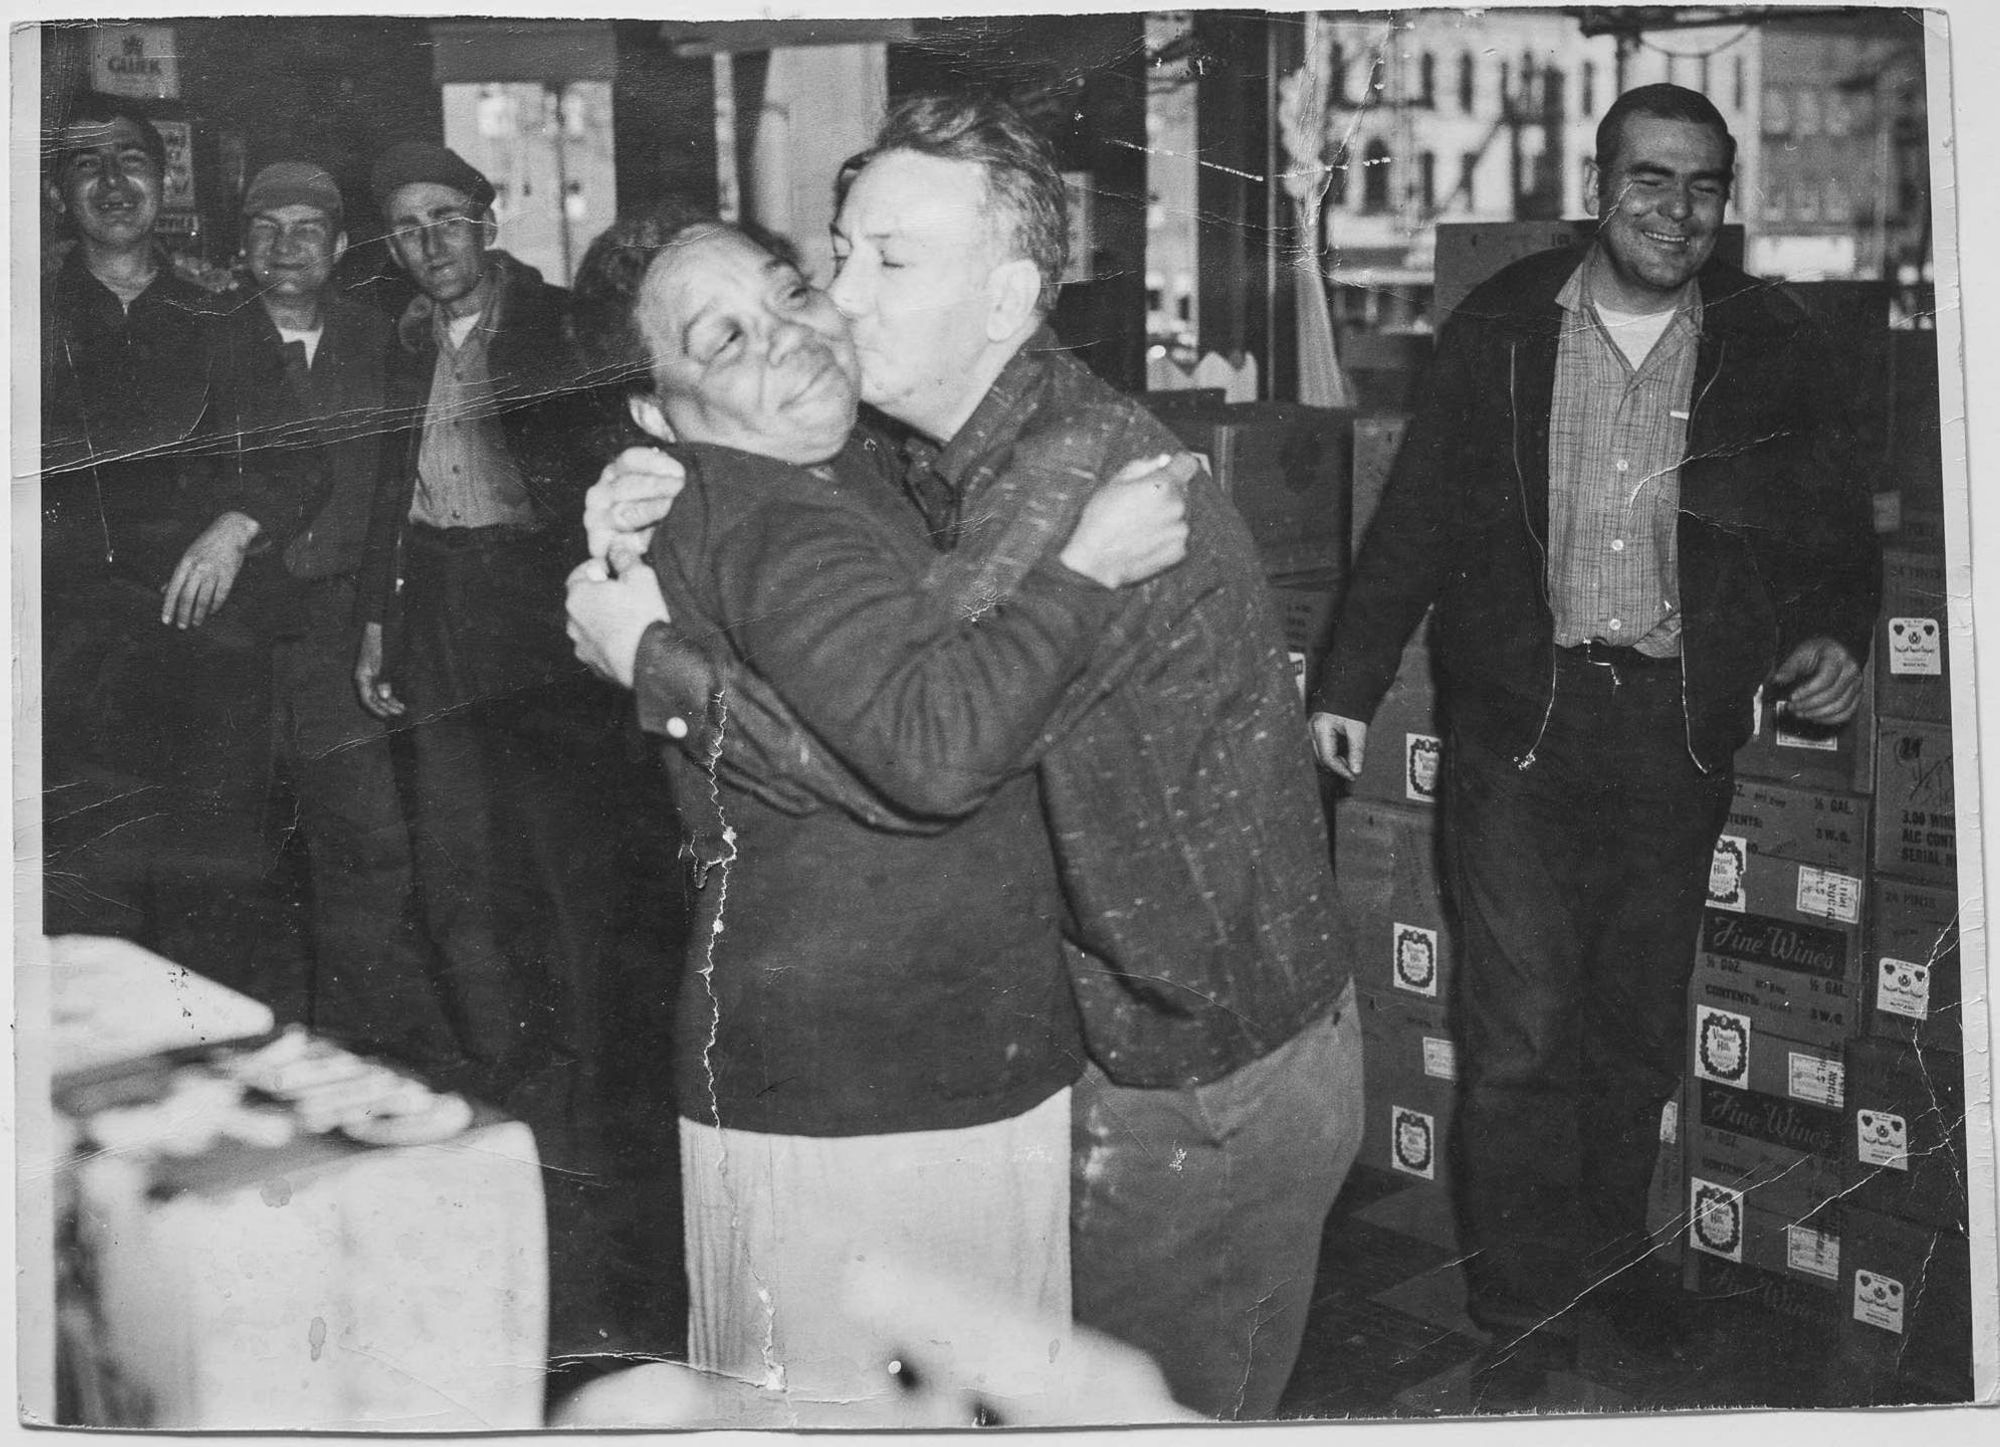 George Johnson planted a kiss on an unknown woman at Rex Liquors. Photo courtesy of John and Barbara Bacich.